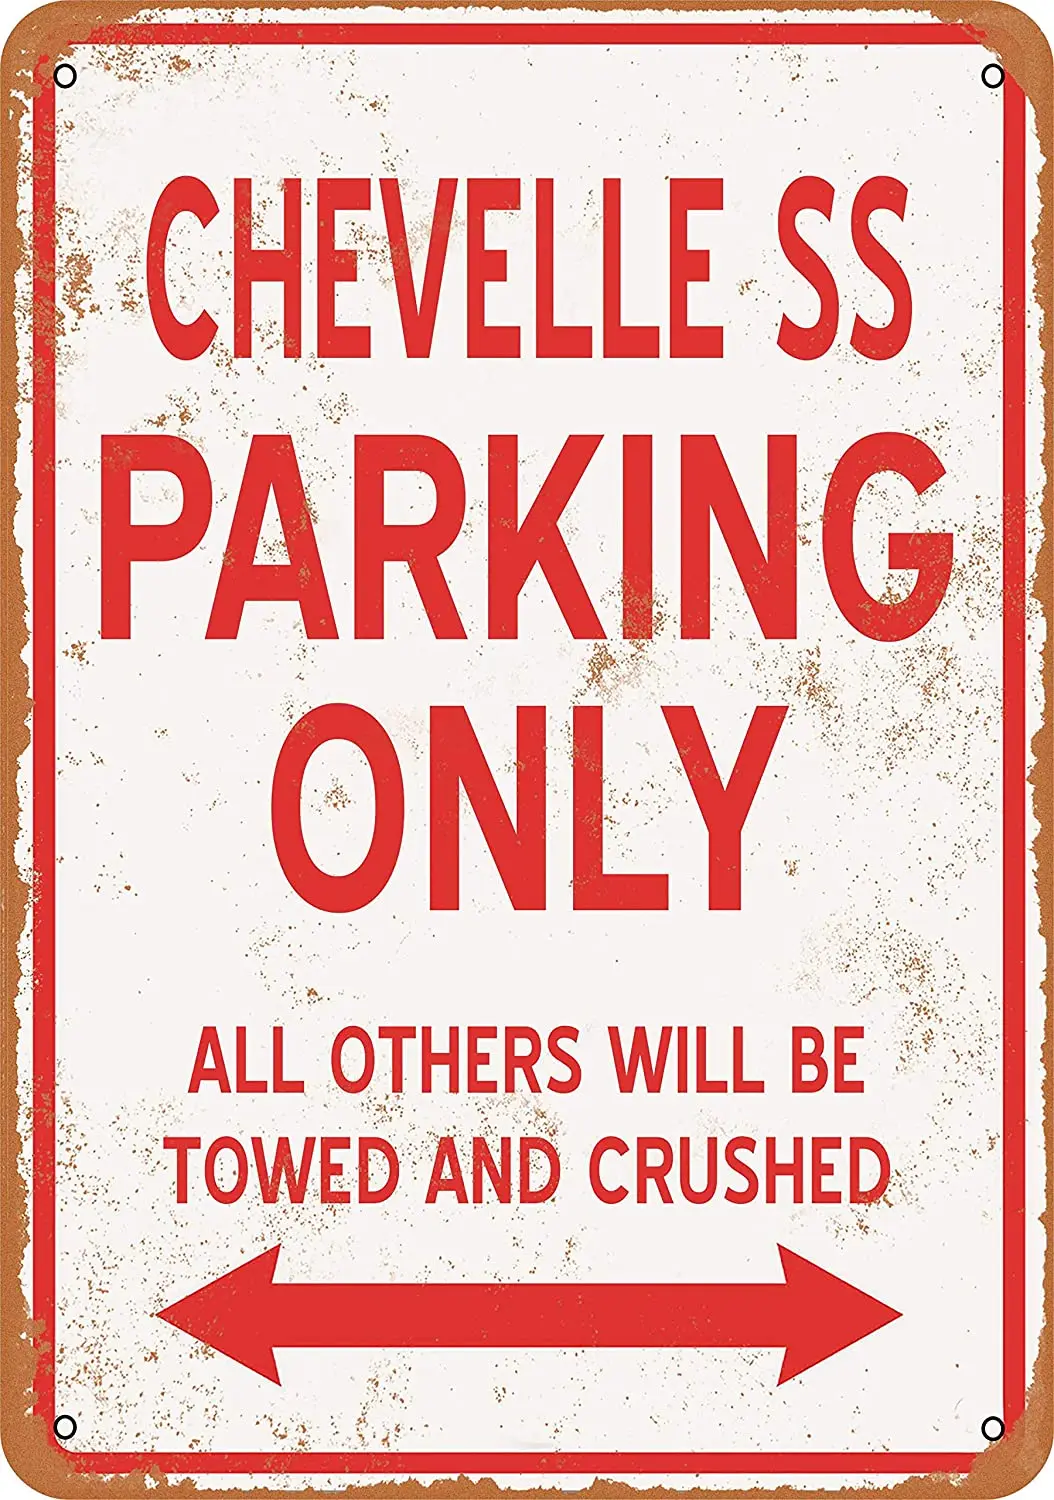 

WallColor 8*12 Metal Sign Chevelle SS Parking ONLY Vintage Look